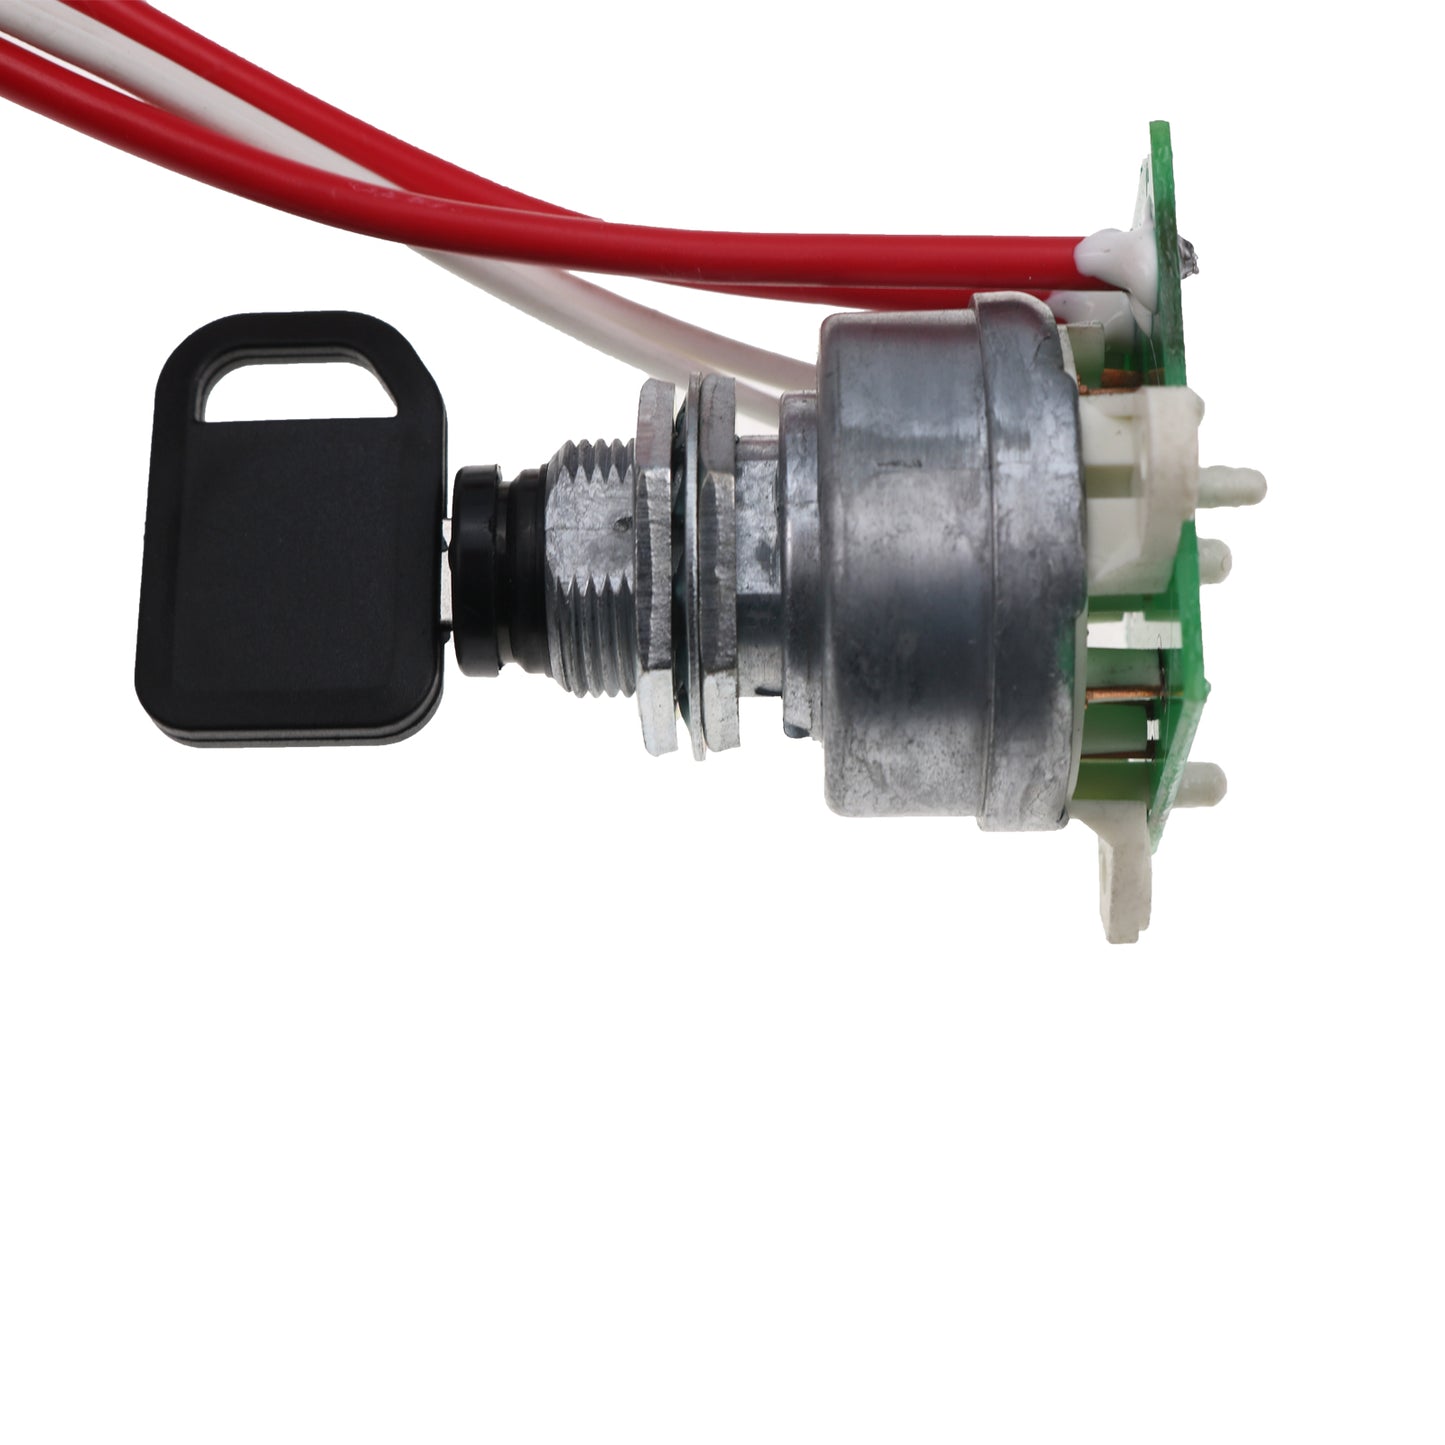 New AM136681 Ignition Switch Module with Key Compatible with John Deere Garden Tractors 415 425 445 455 Serial Numbers - 070000